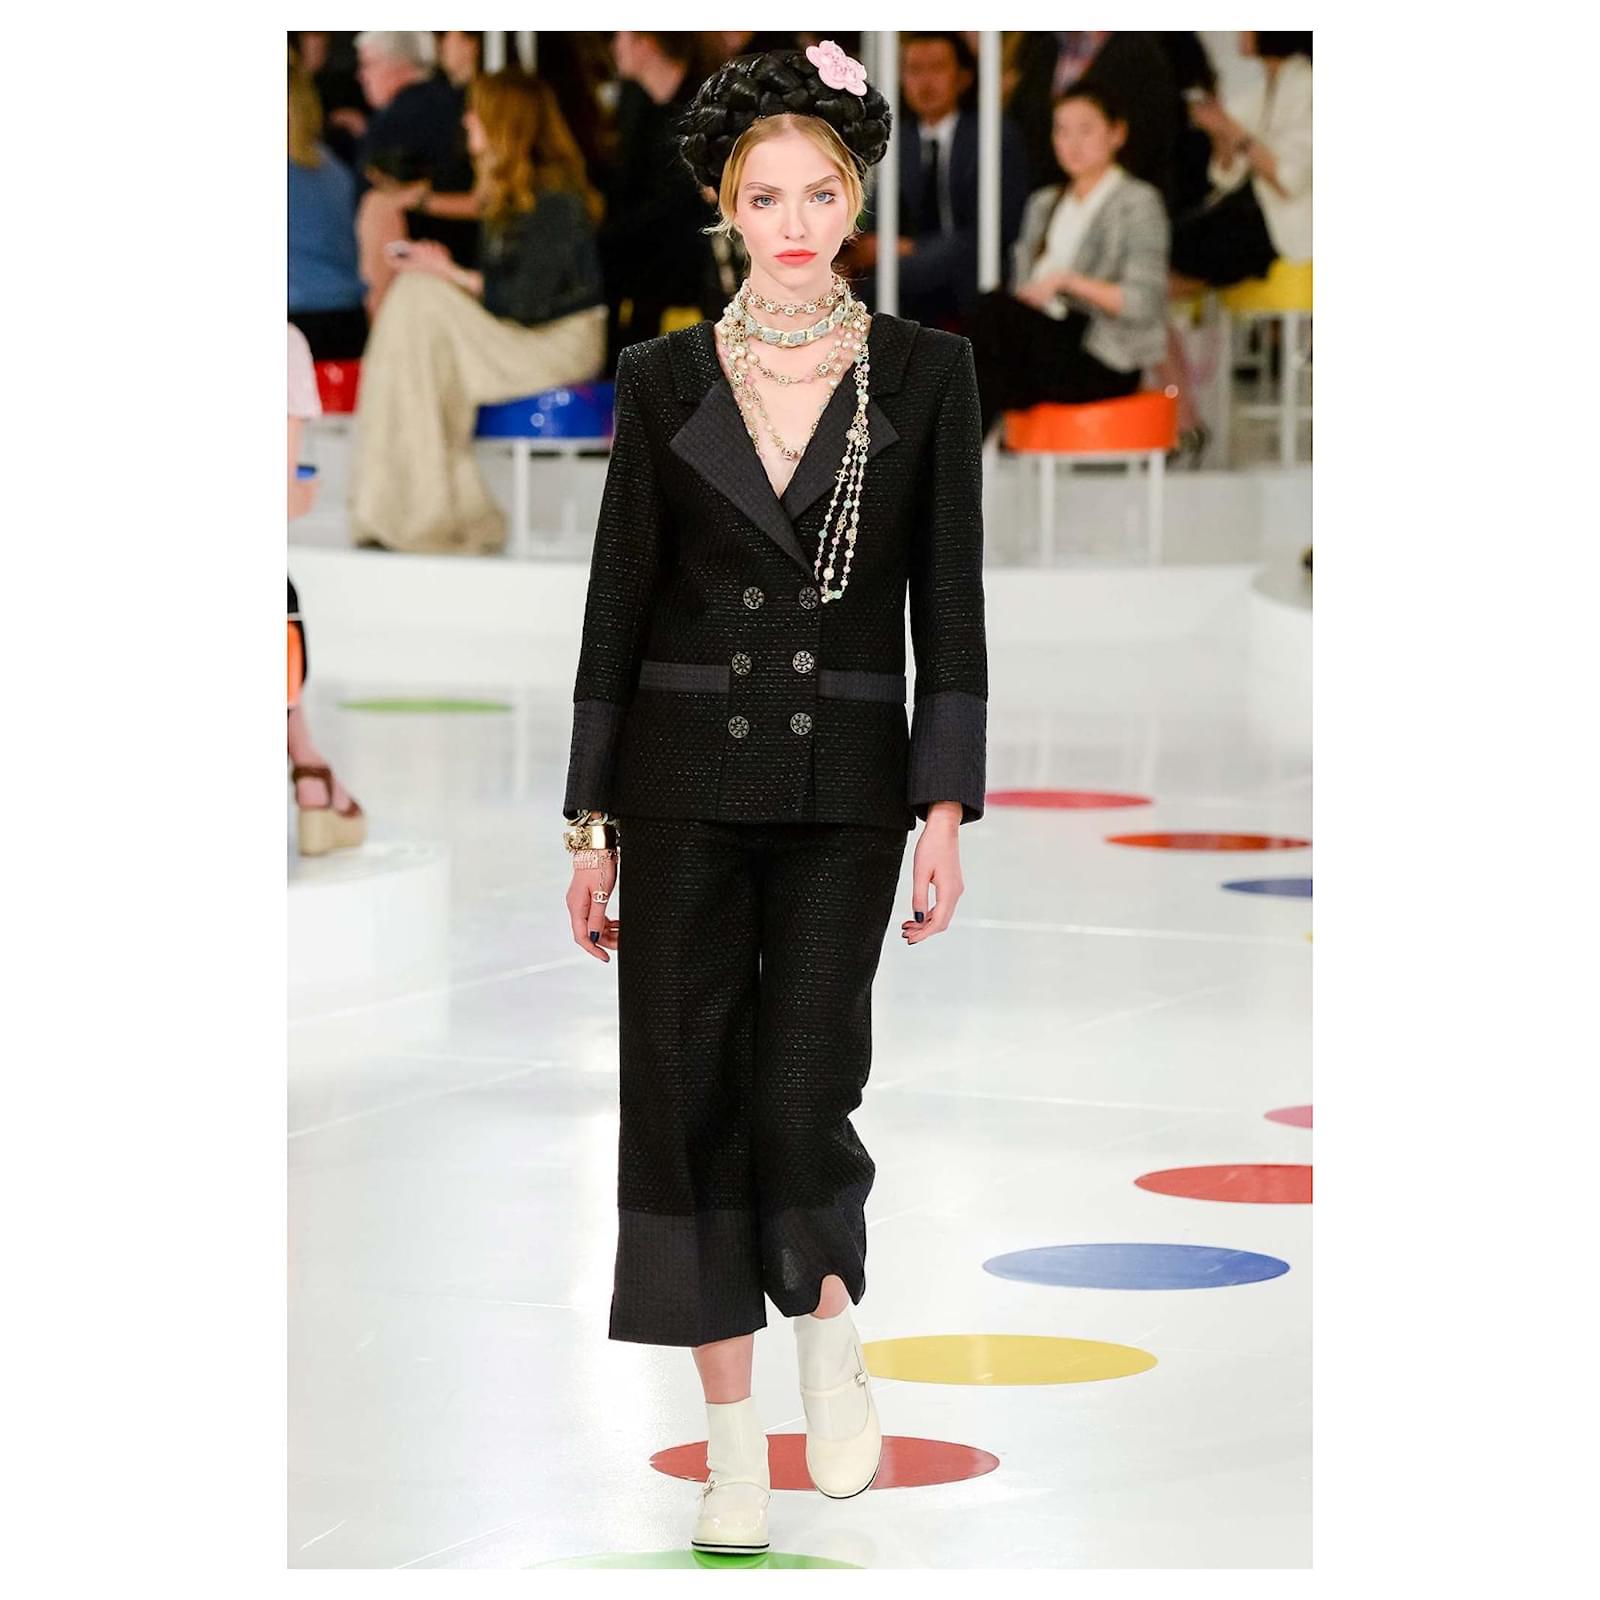 Chanel little black jacket  with belt   from Paris / SEOUL Cruise Collection. Look # 52 from Catwalk.
Size mark 34 fr. Condition is pristine.
- made of black tweed
- CC logo buttons